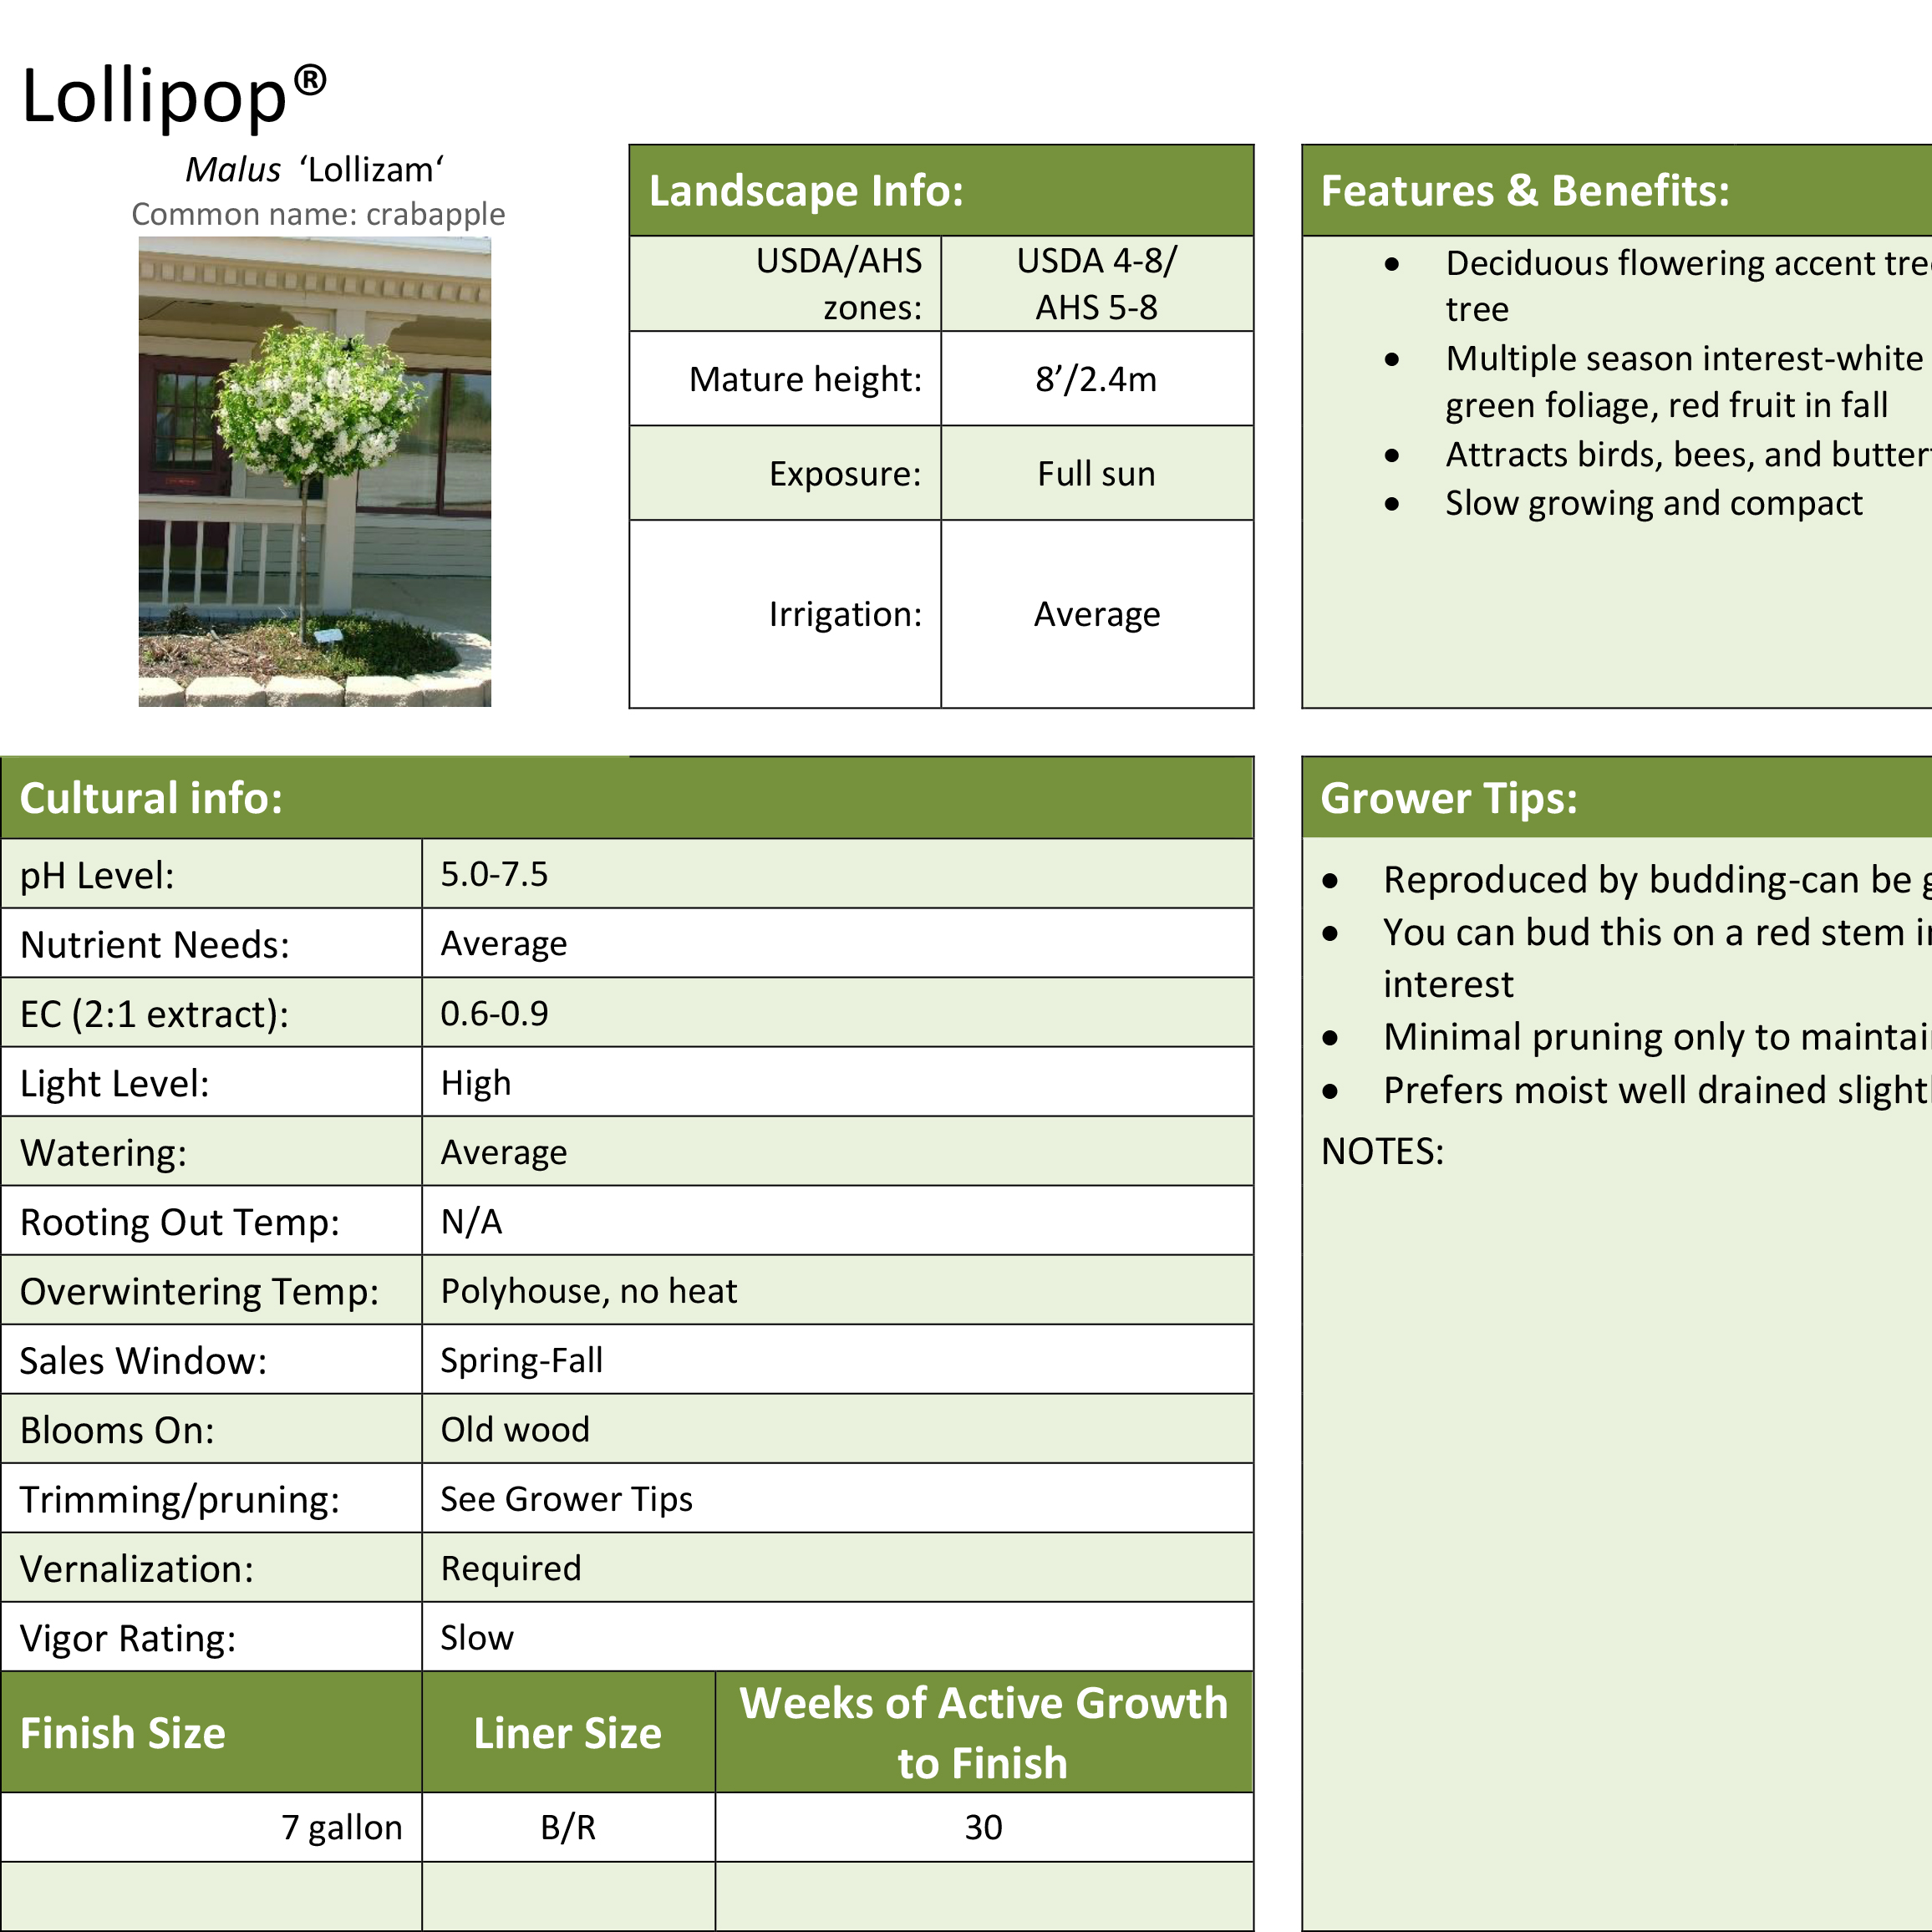 Preview of Lollipop Malus Professional Grower Sheet PDF